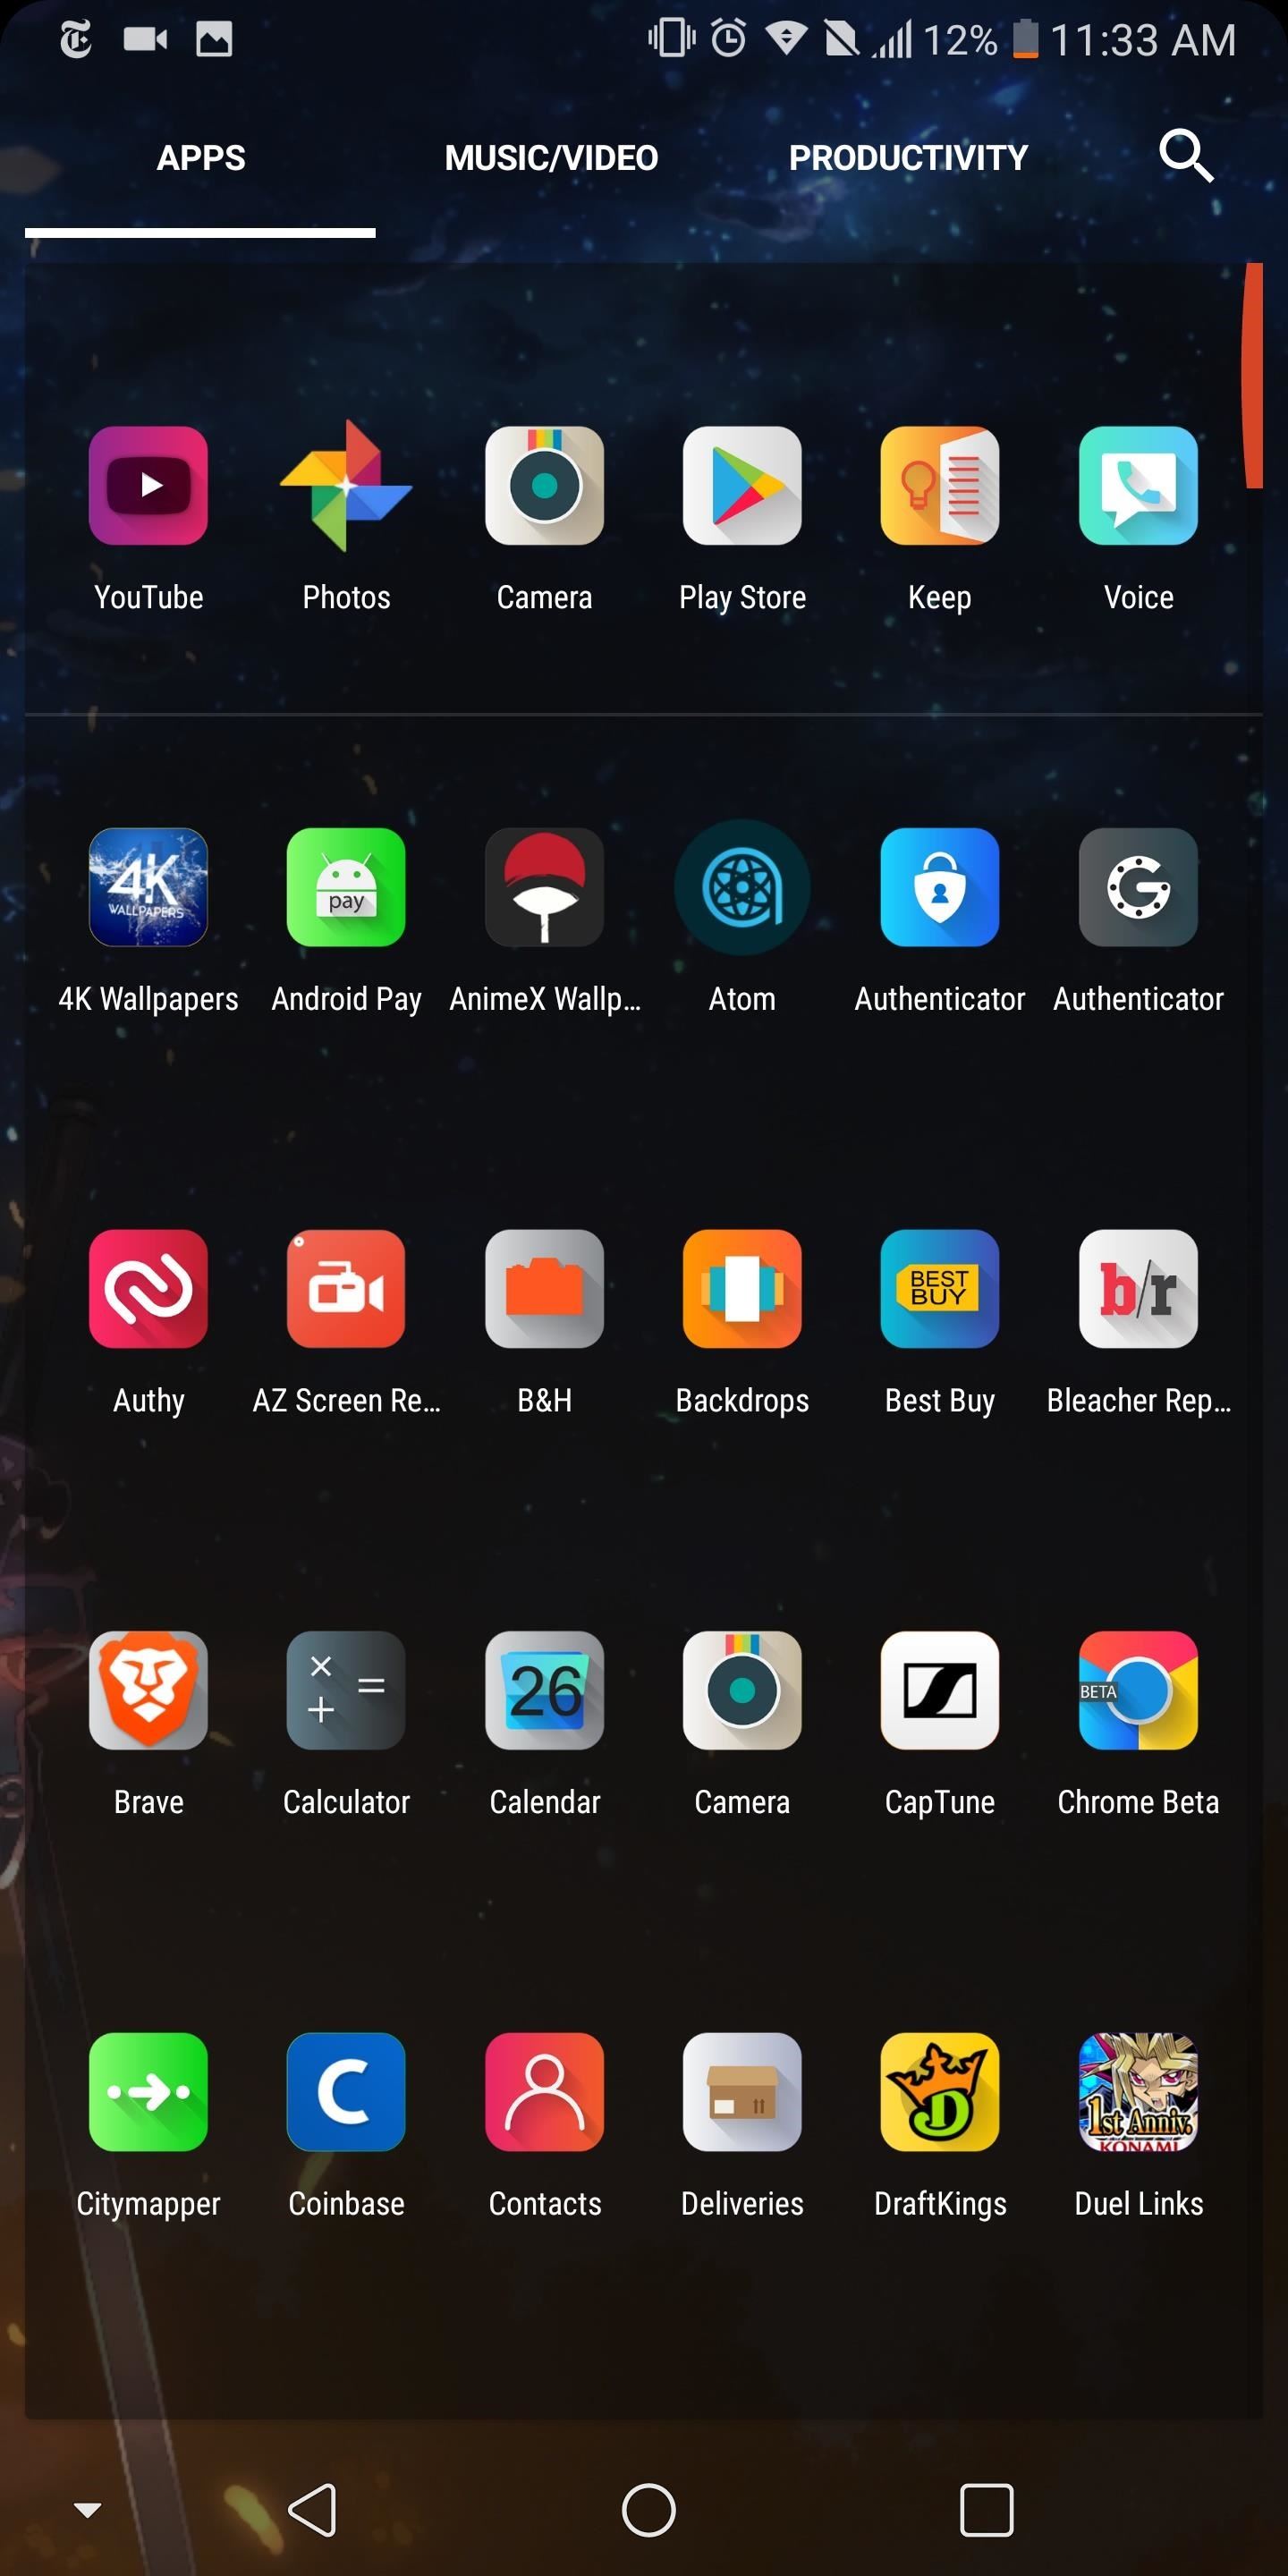 5 Tips to Increase Your Productivity Using Nova Launcher